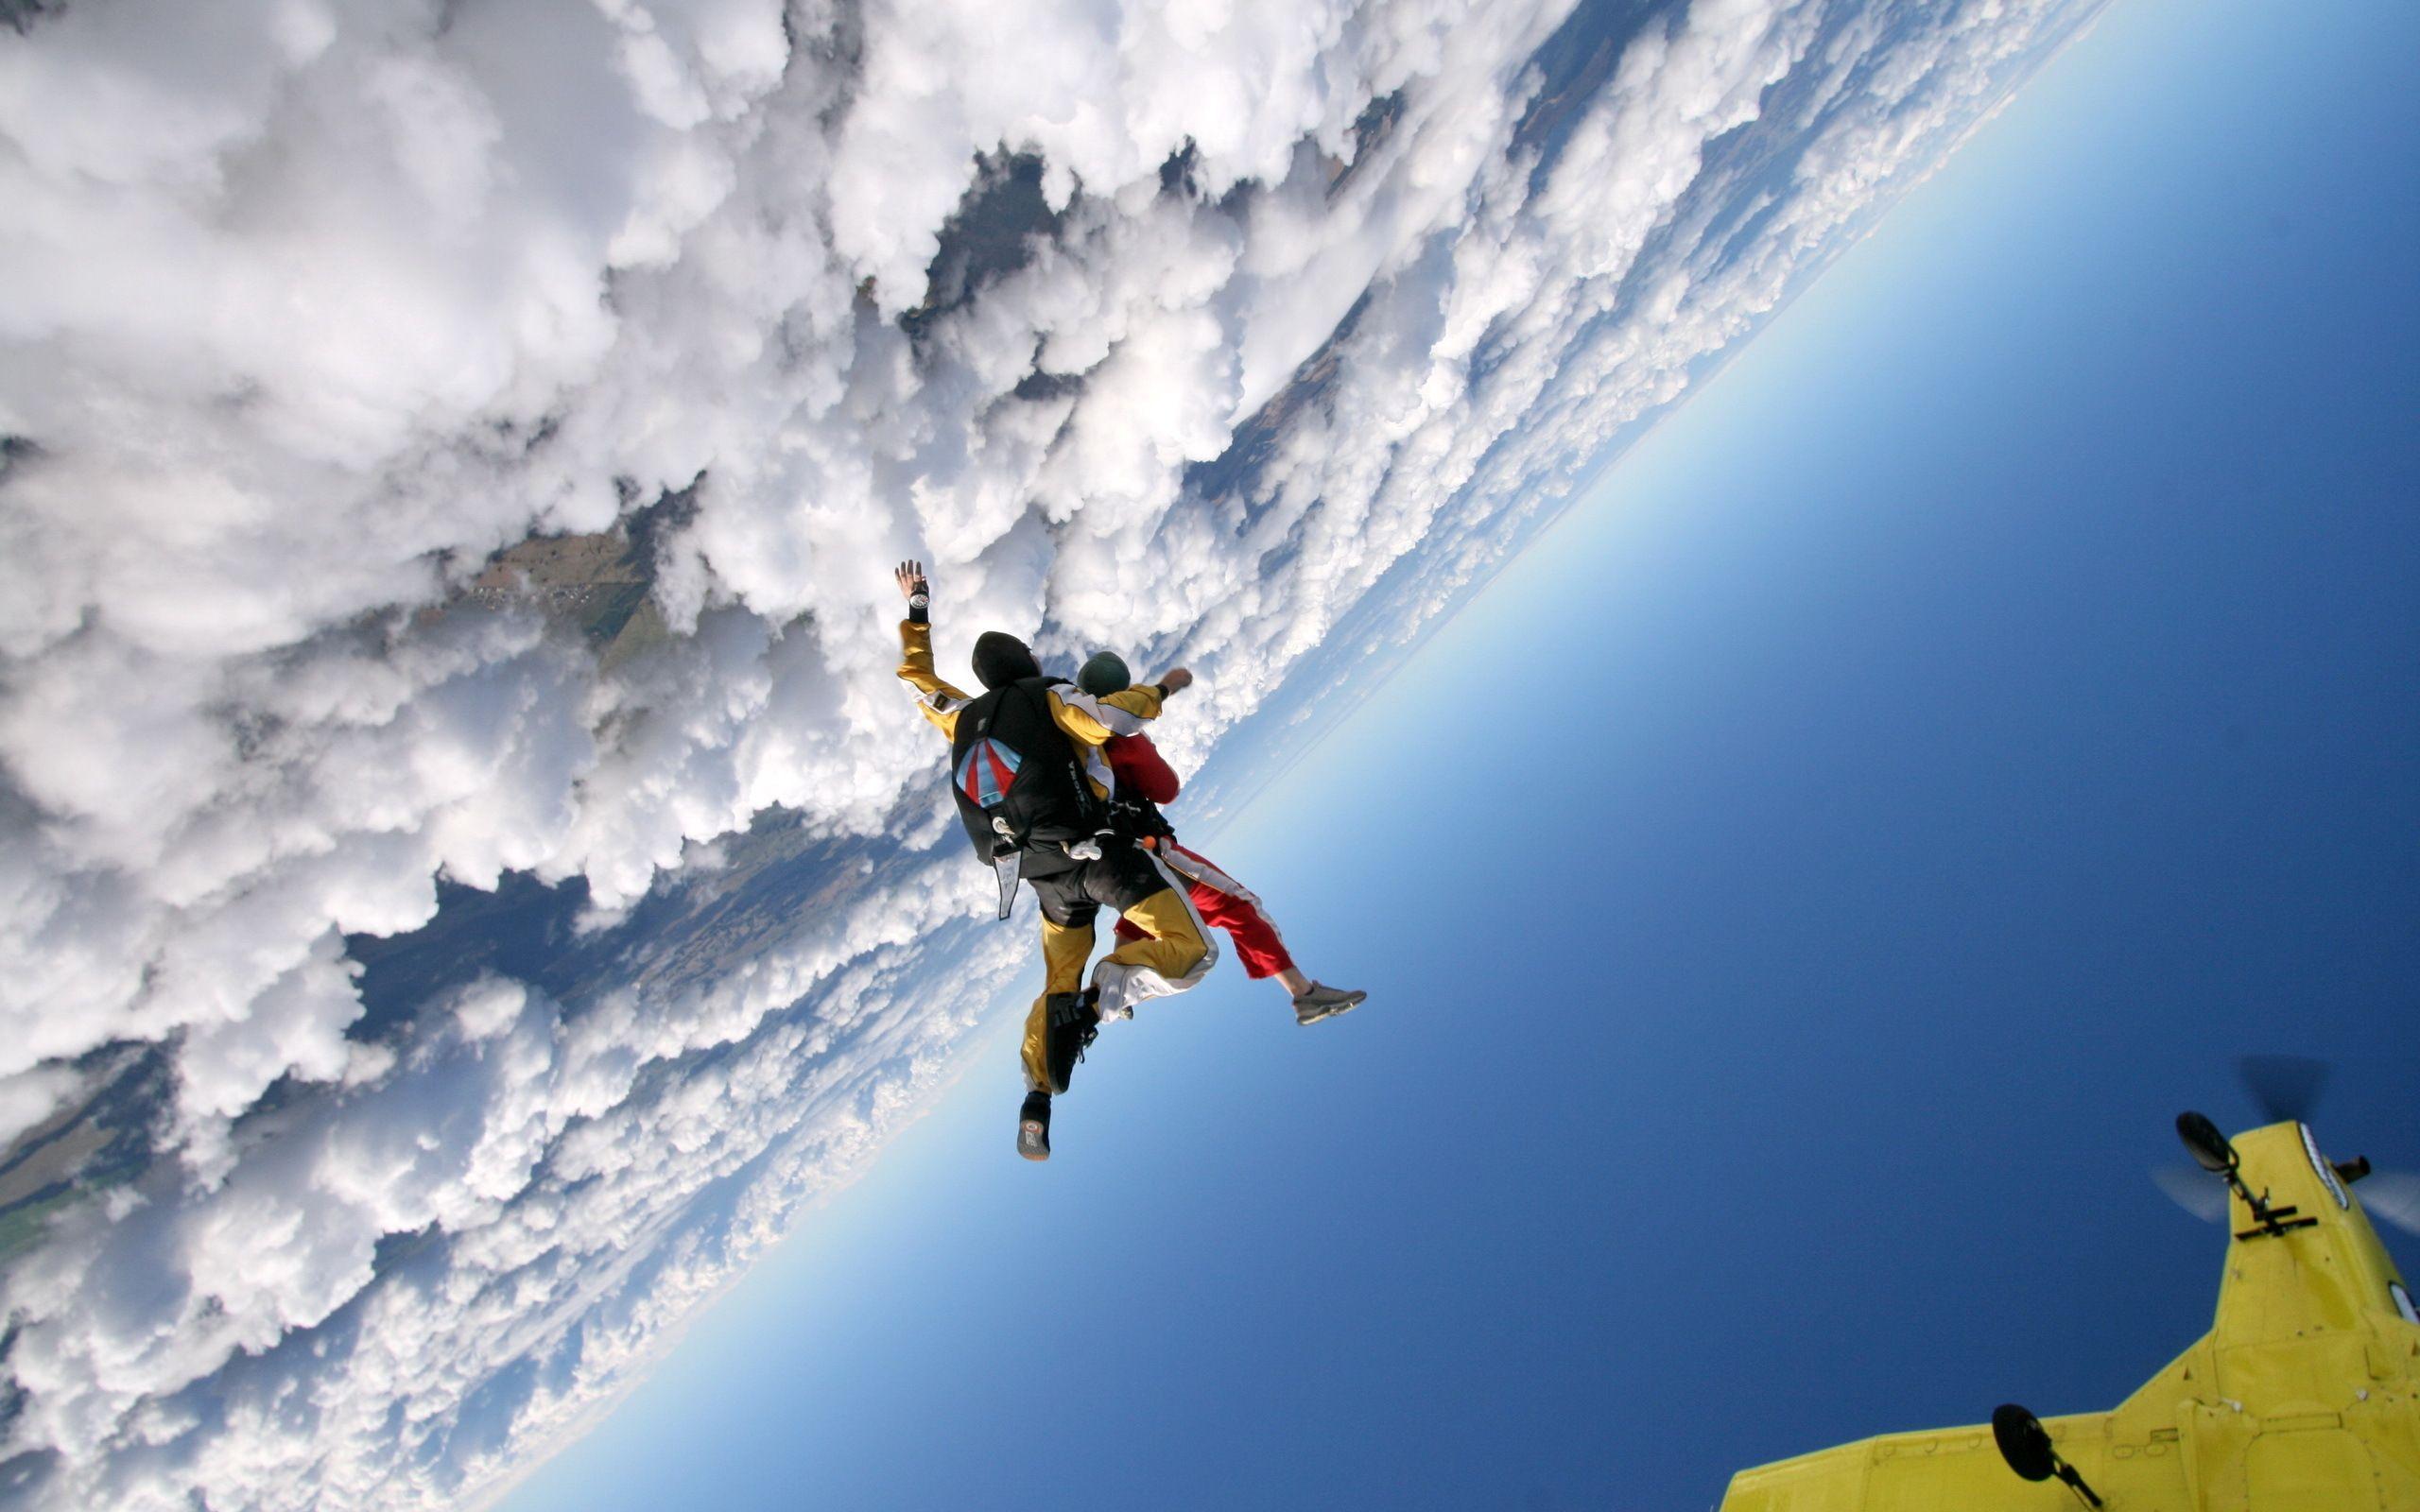 Skydiving HD Wallpaper. Background. Image